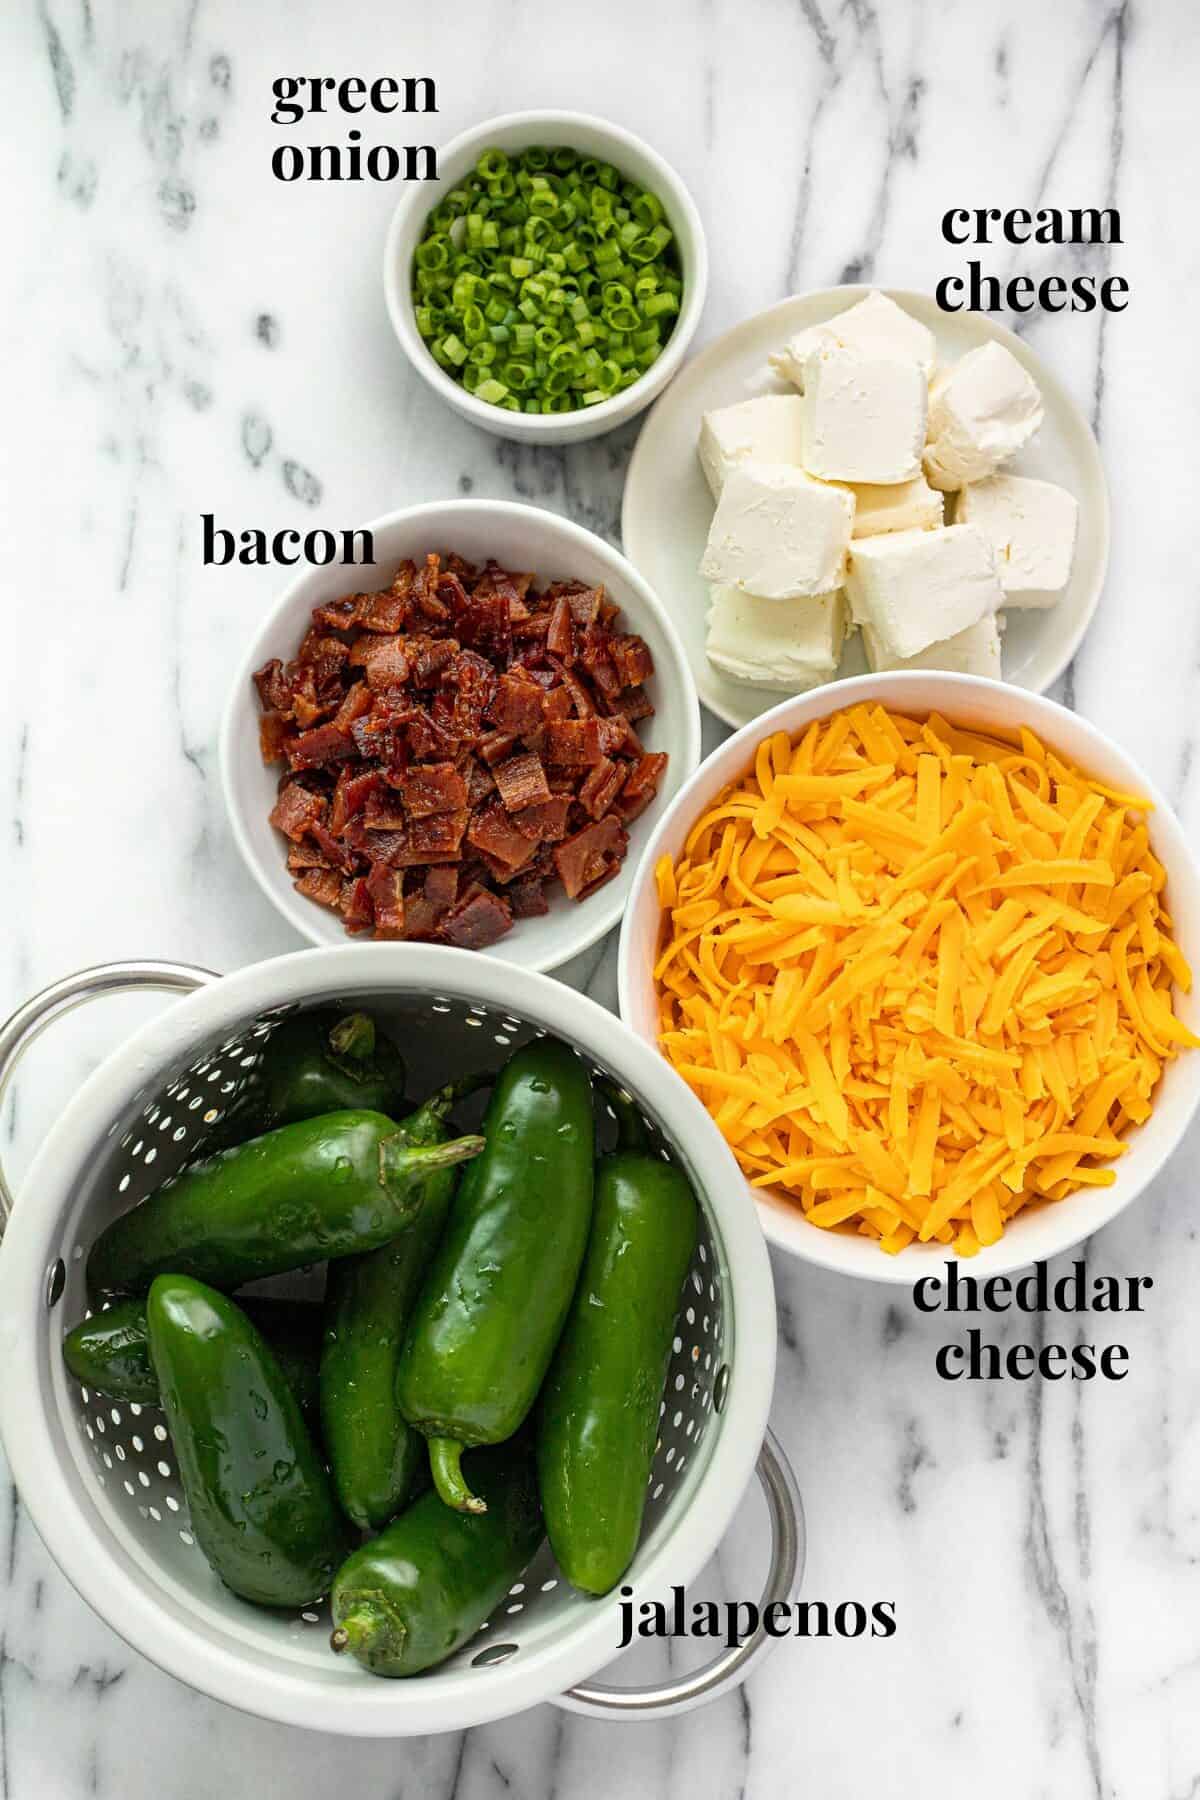 Bowls of ingredients to make smoked jalapeno poppers.